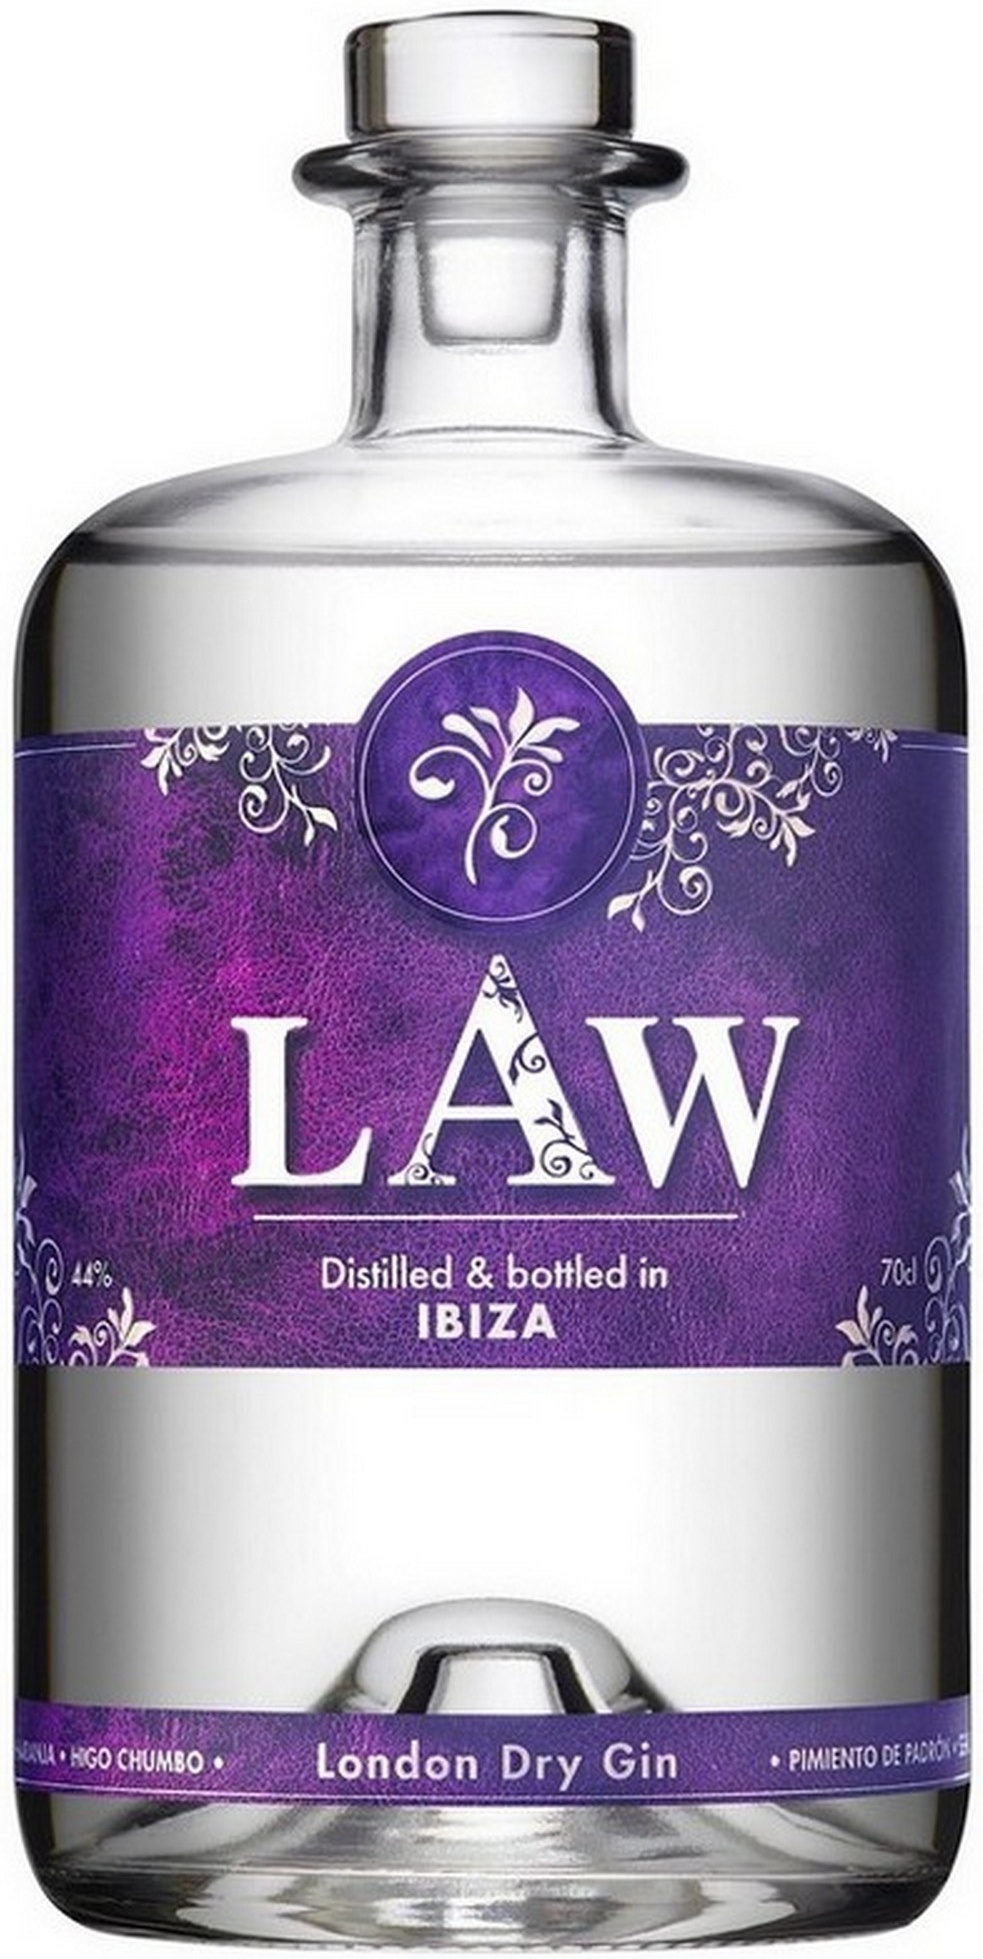 law-the-gin-of-ibiza-